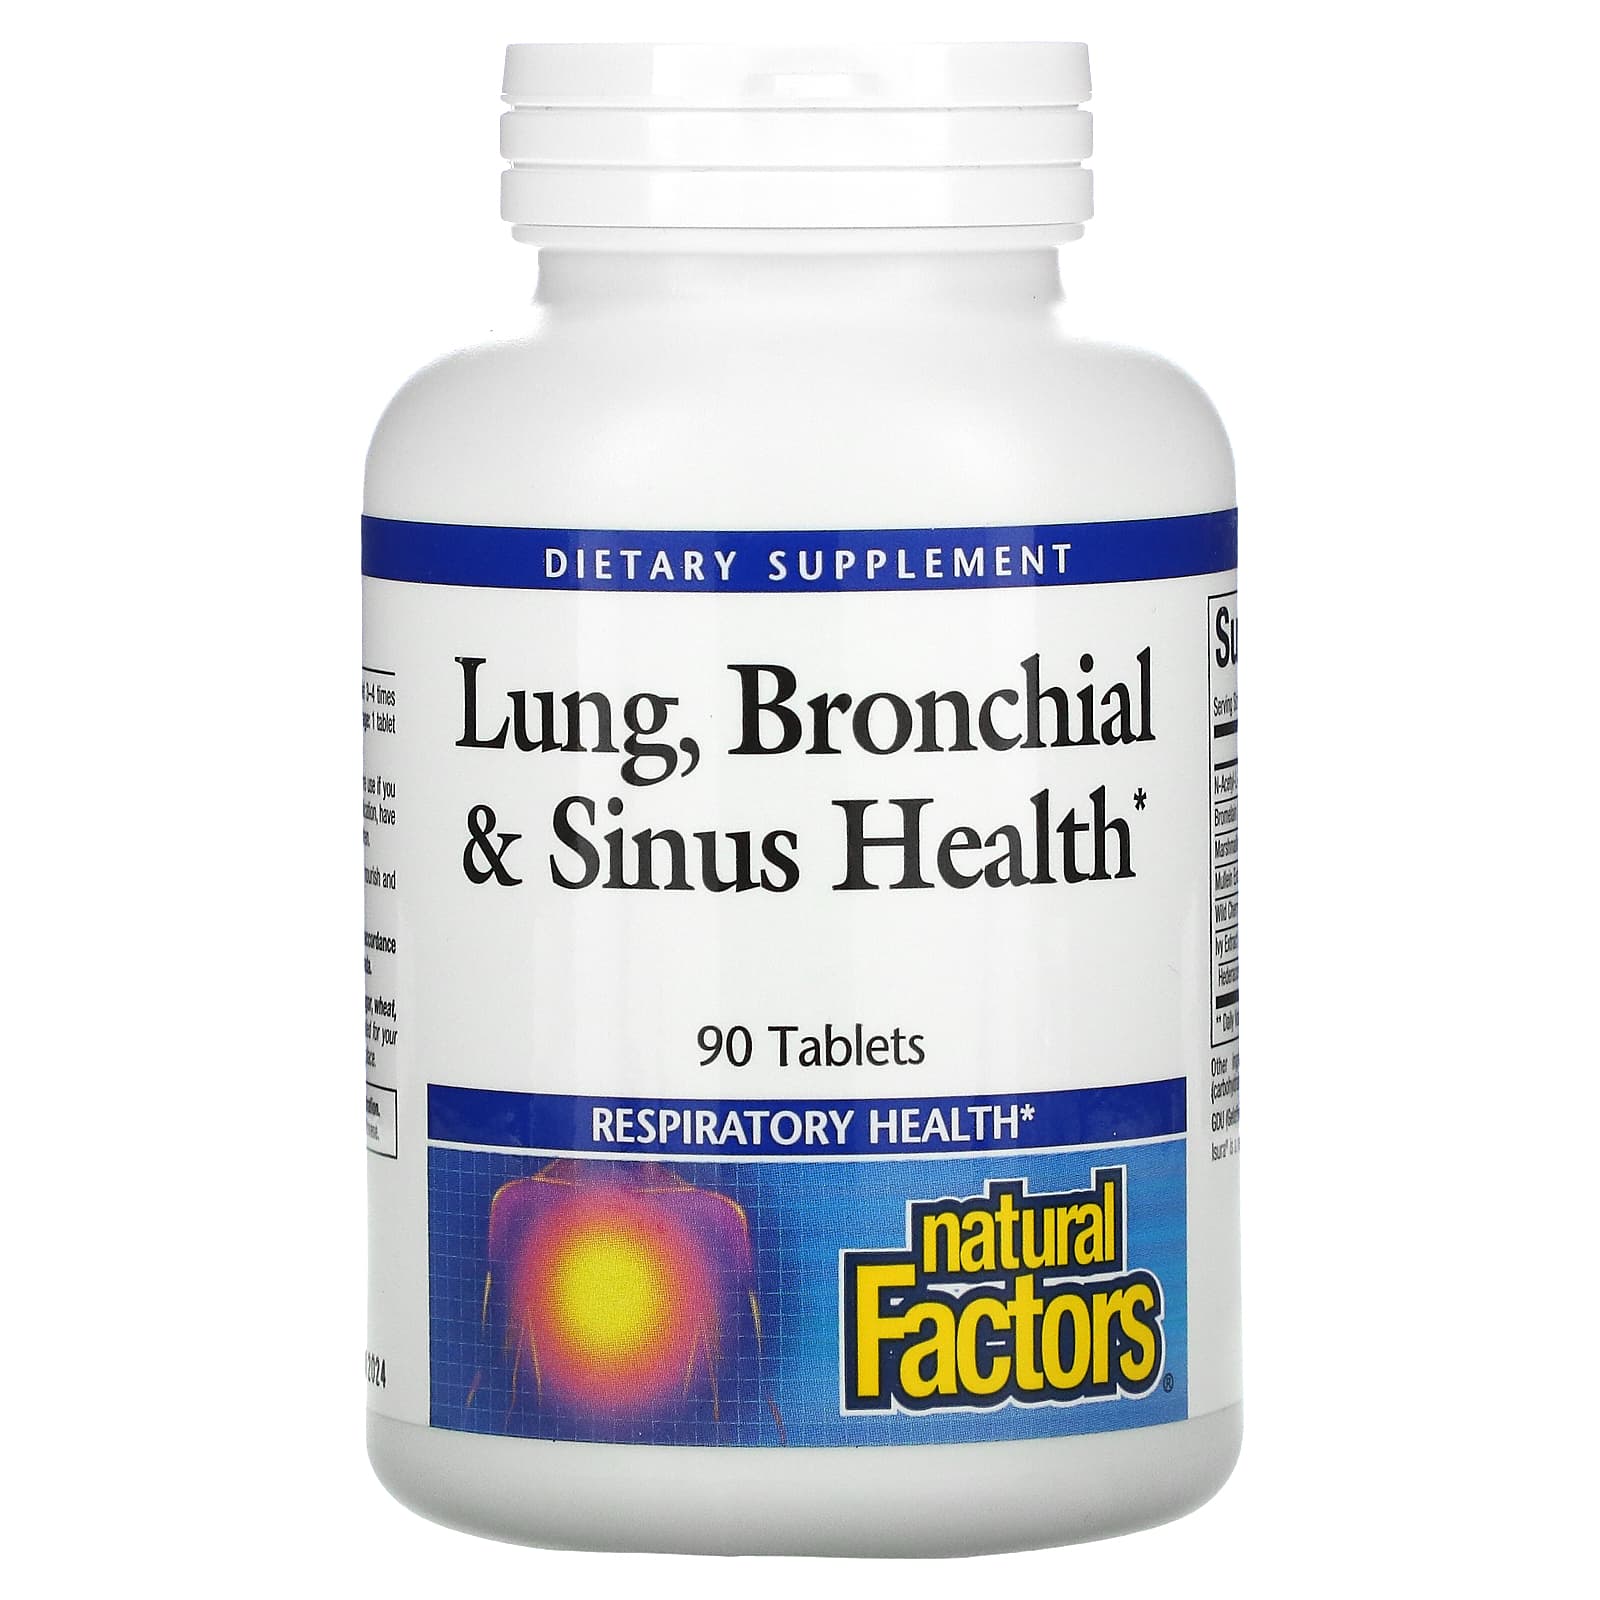 Natural Factors Lung, Bronchial & Sinus Health, 90 Tablets